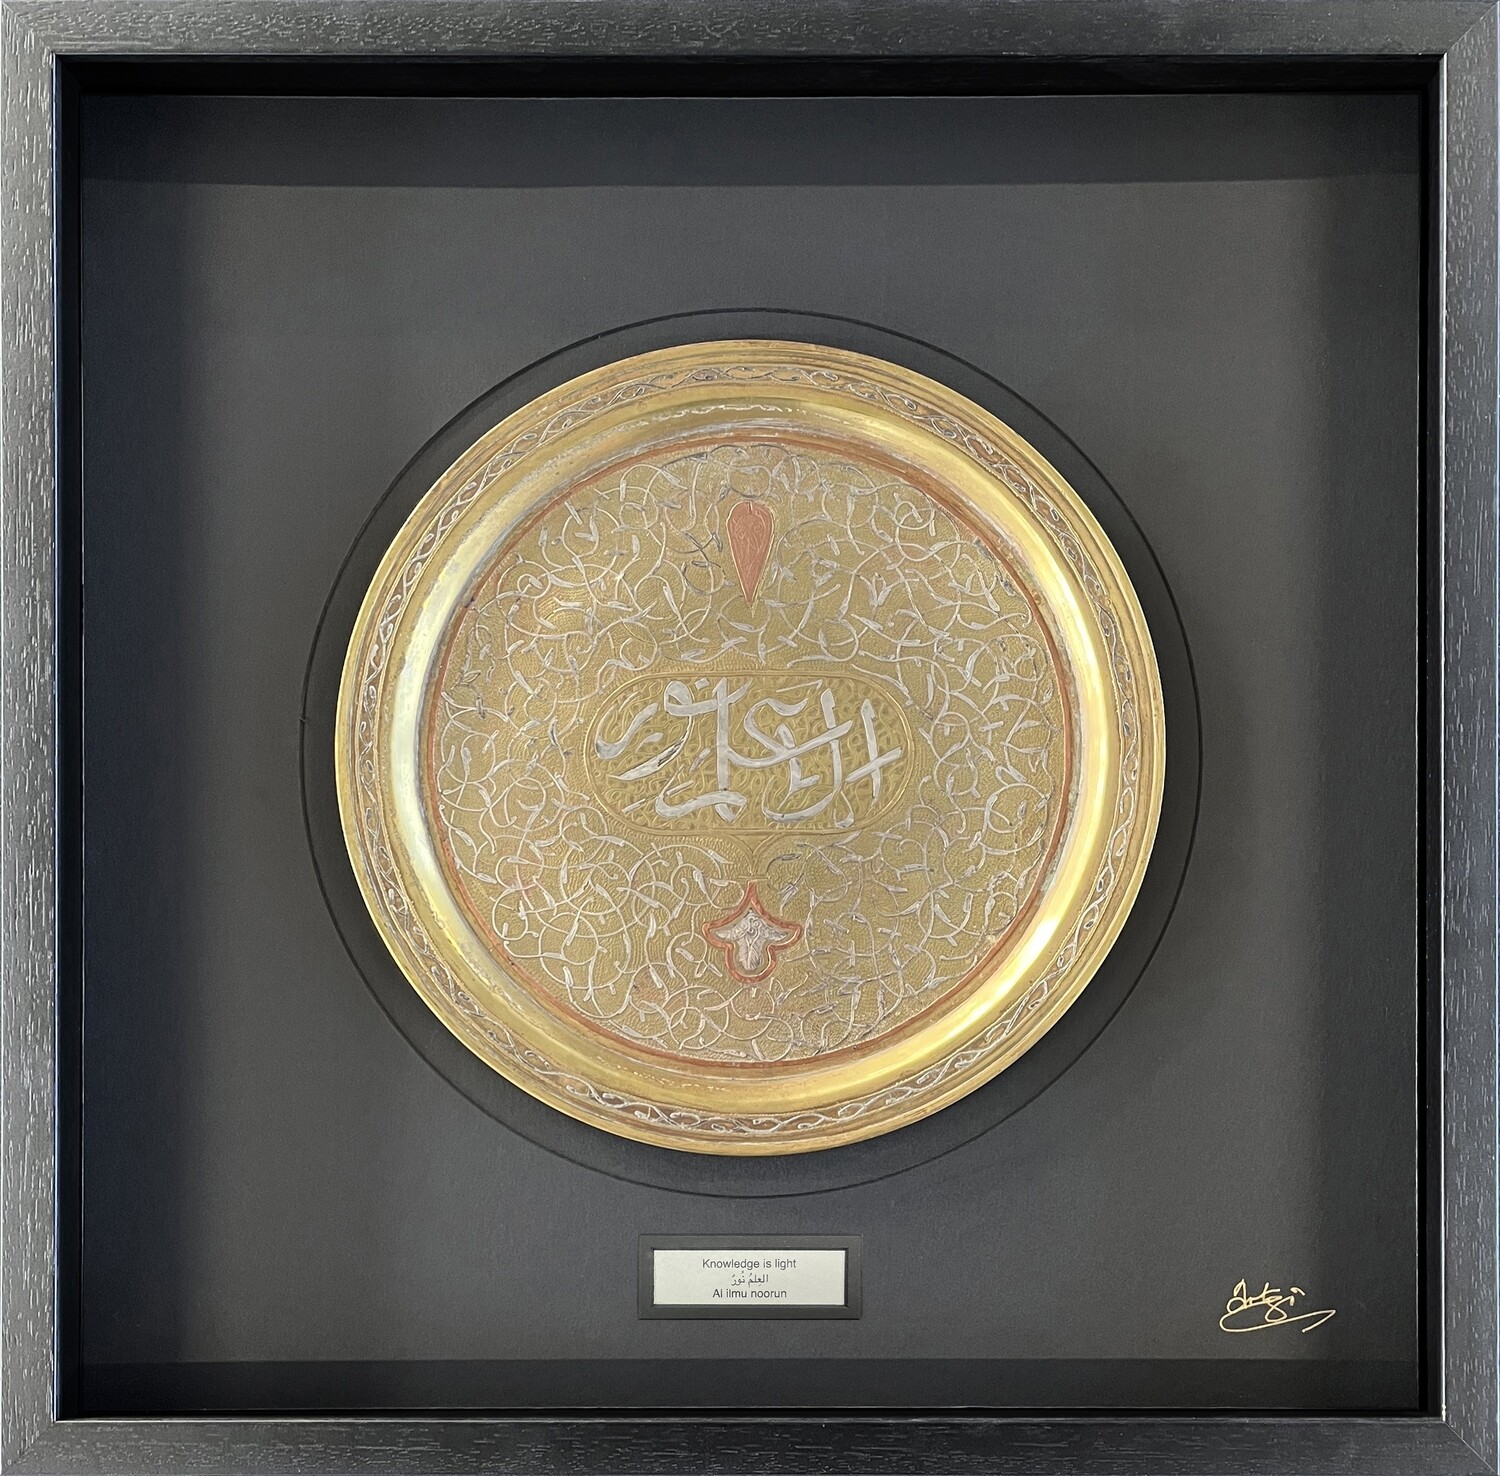 Knowledge is Light  - Antique Brass Plate